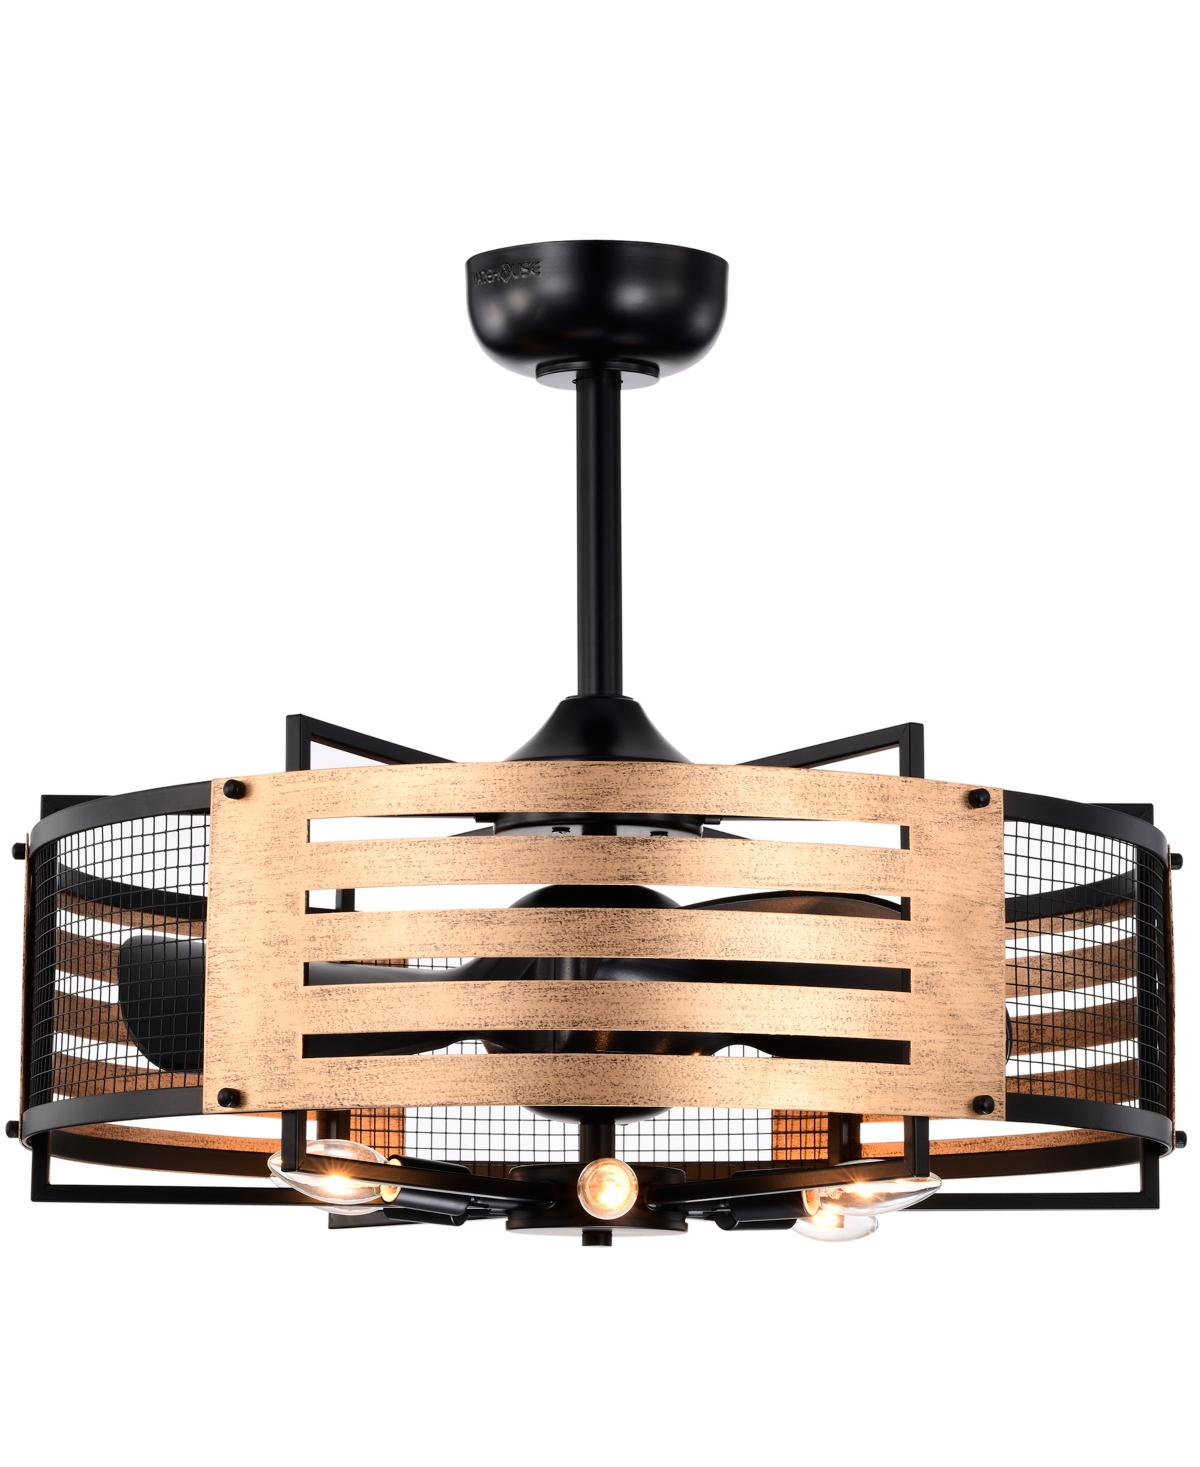 Home Accessories Brixton 26" 6-light Indoor Ceiling Fan With Light Kit And Remote In Matte Black And Gold